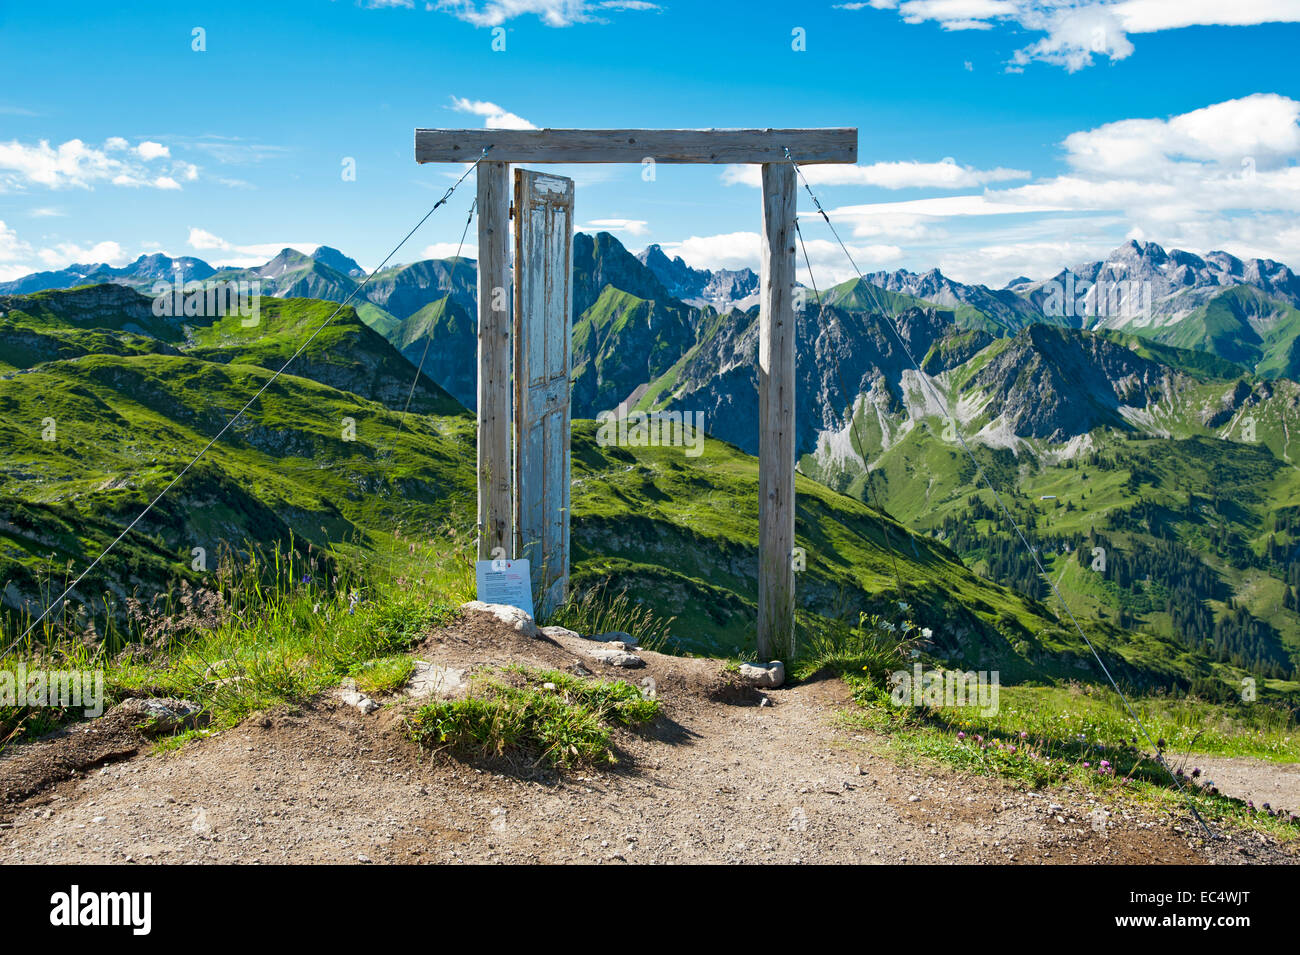 Porta Alpina by Guenter Rauch in the Alps Stock Photo - Alamy